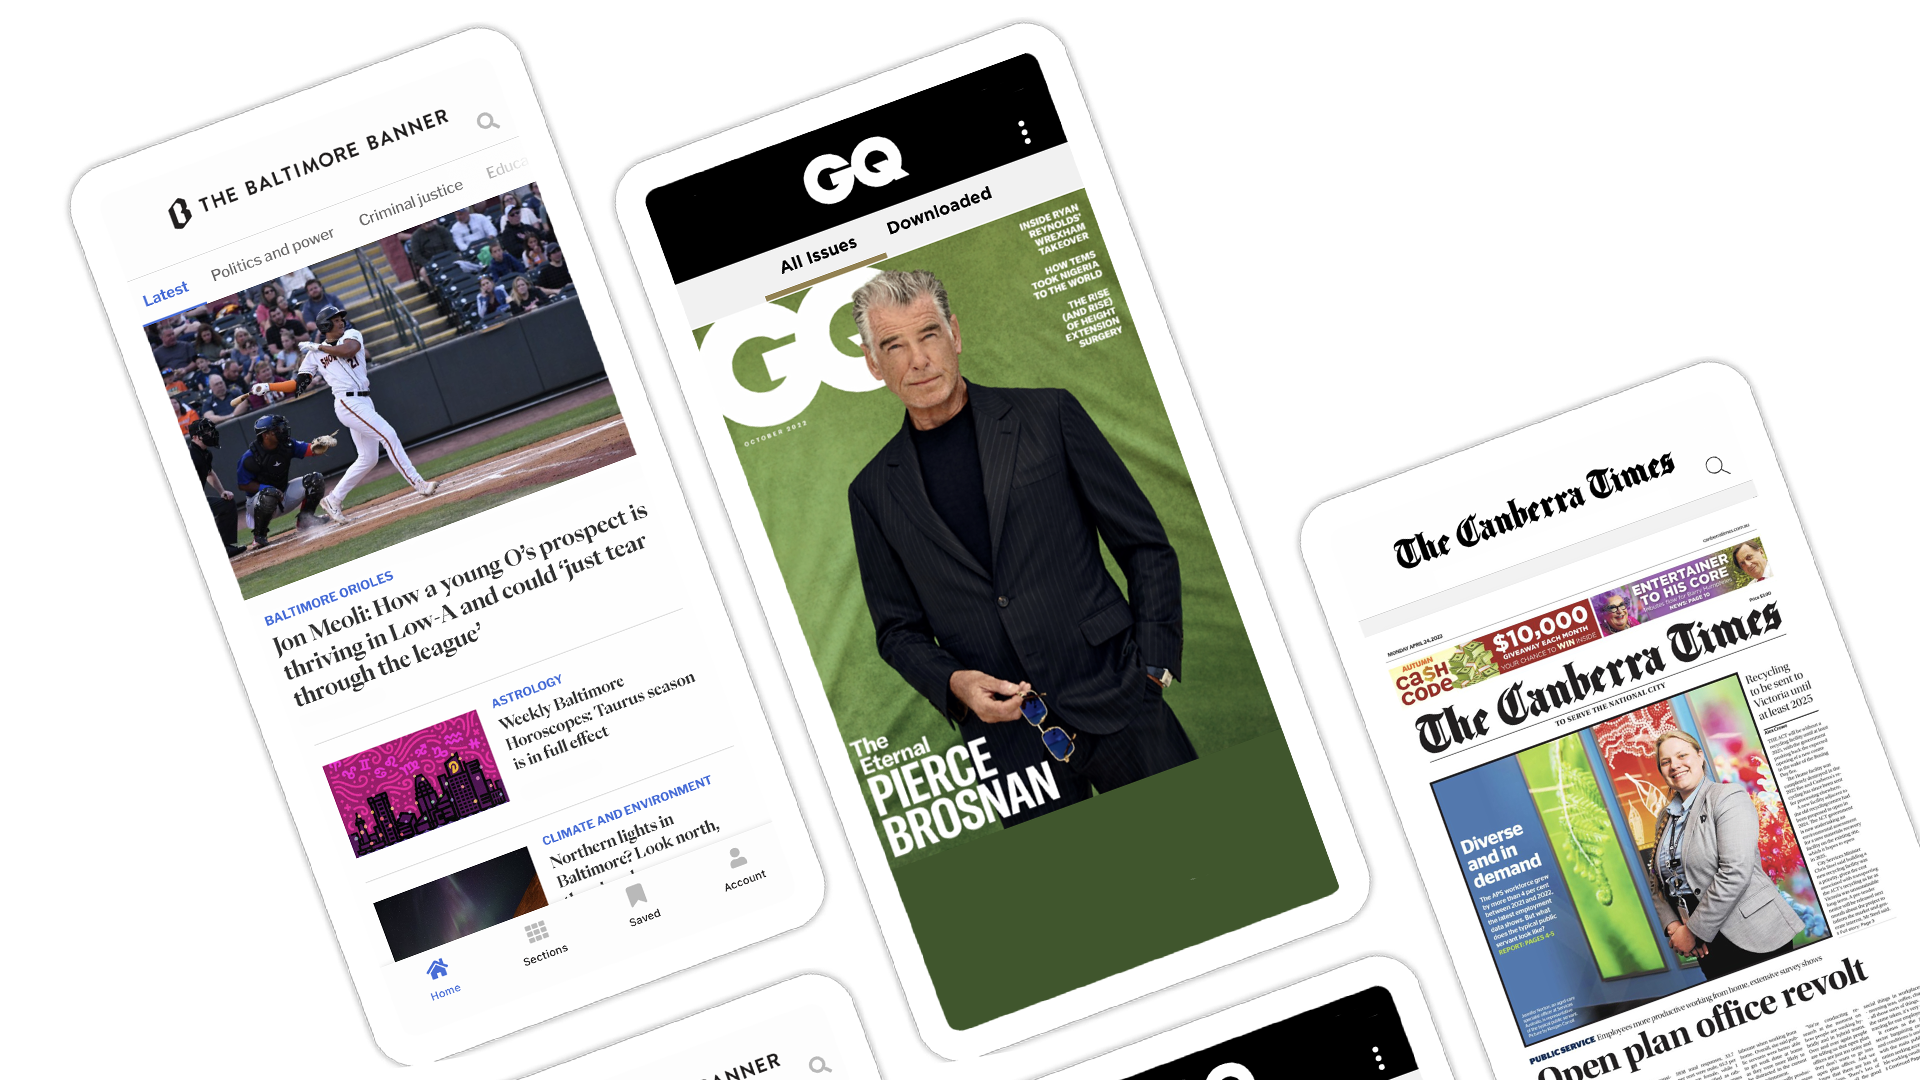 The Baltimore Banner, GQ and The Canberra Times apps